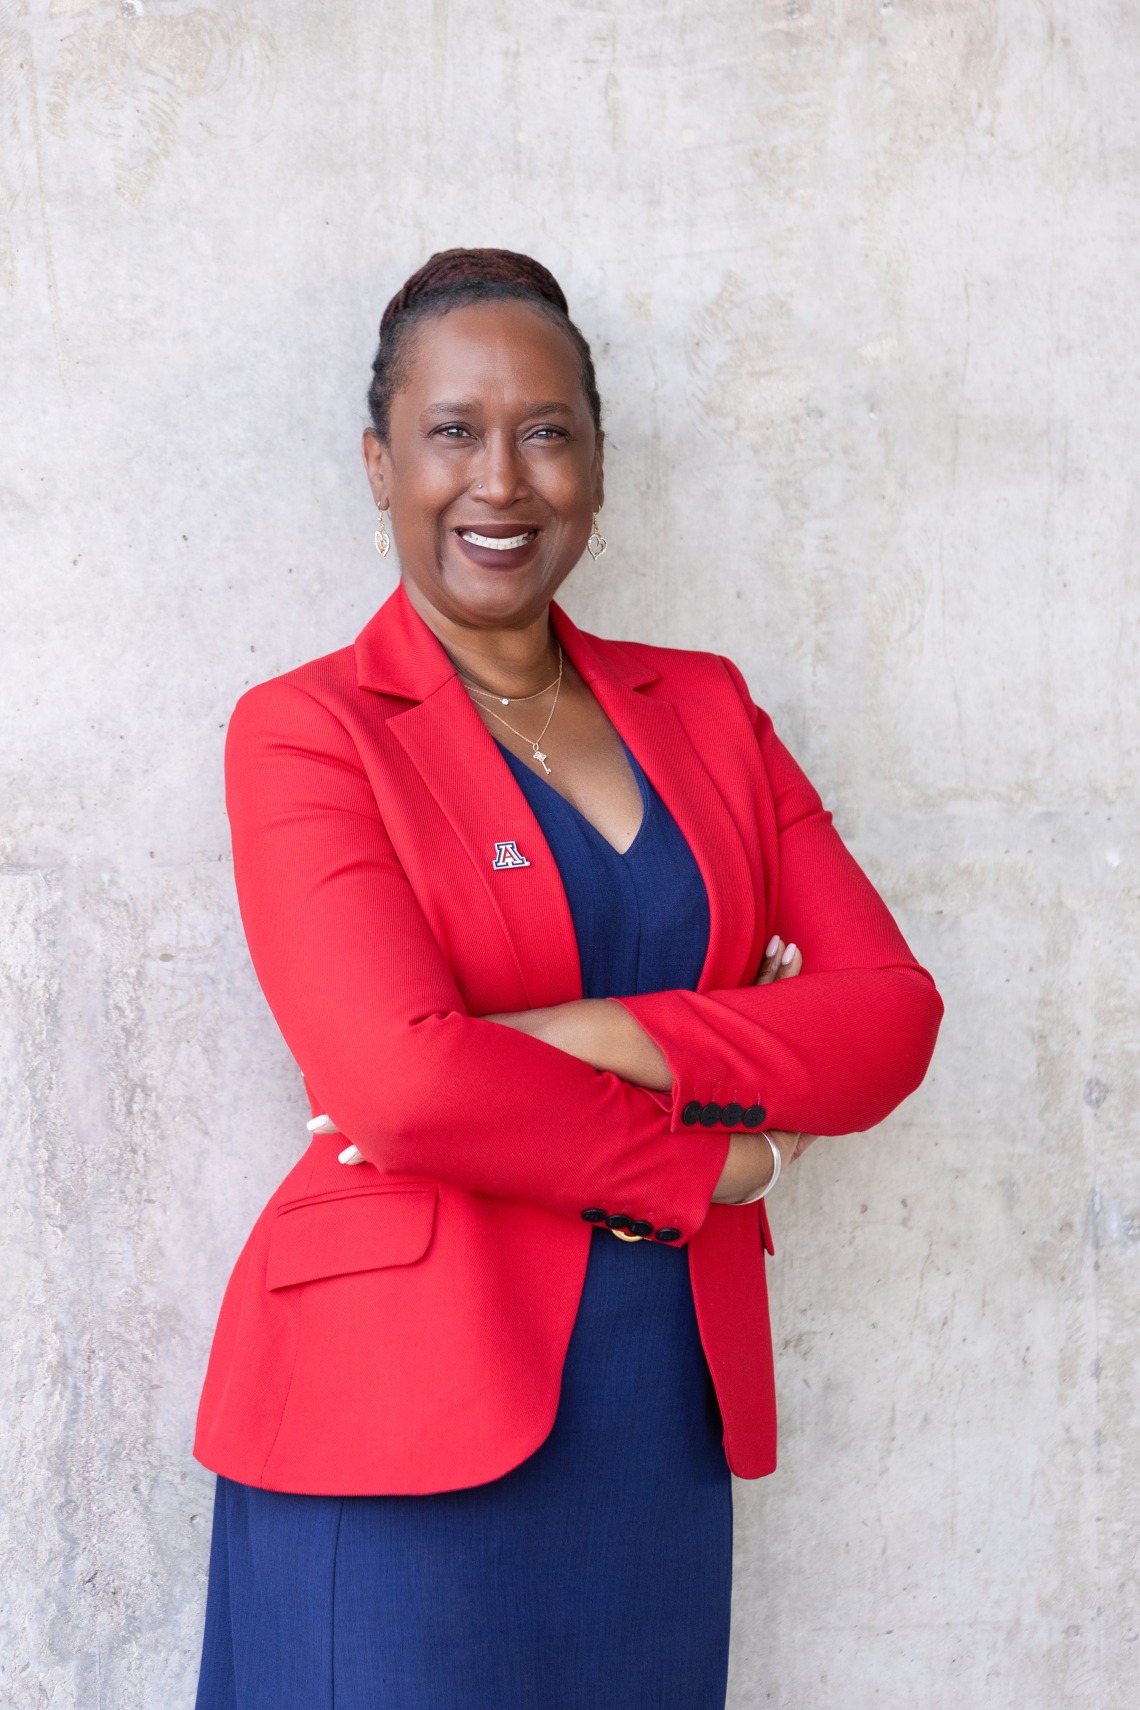 Dr. Hatcher is wearing a red blazer with a University Of Arizona "A" Pin and a dark blue dress. She is smiling with her arms crossed as she stands against a concrete wall. 